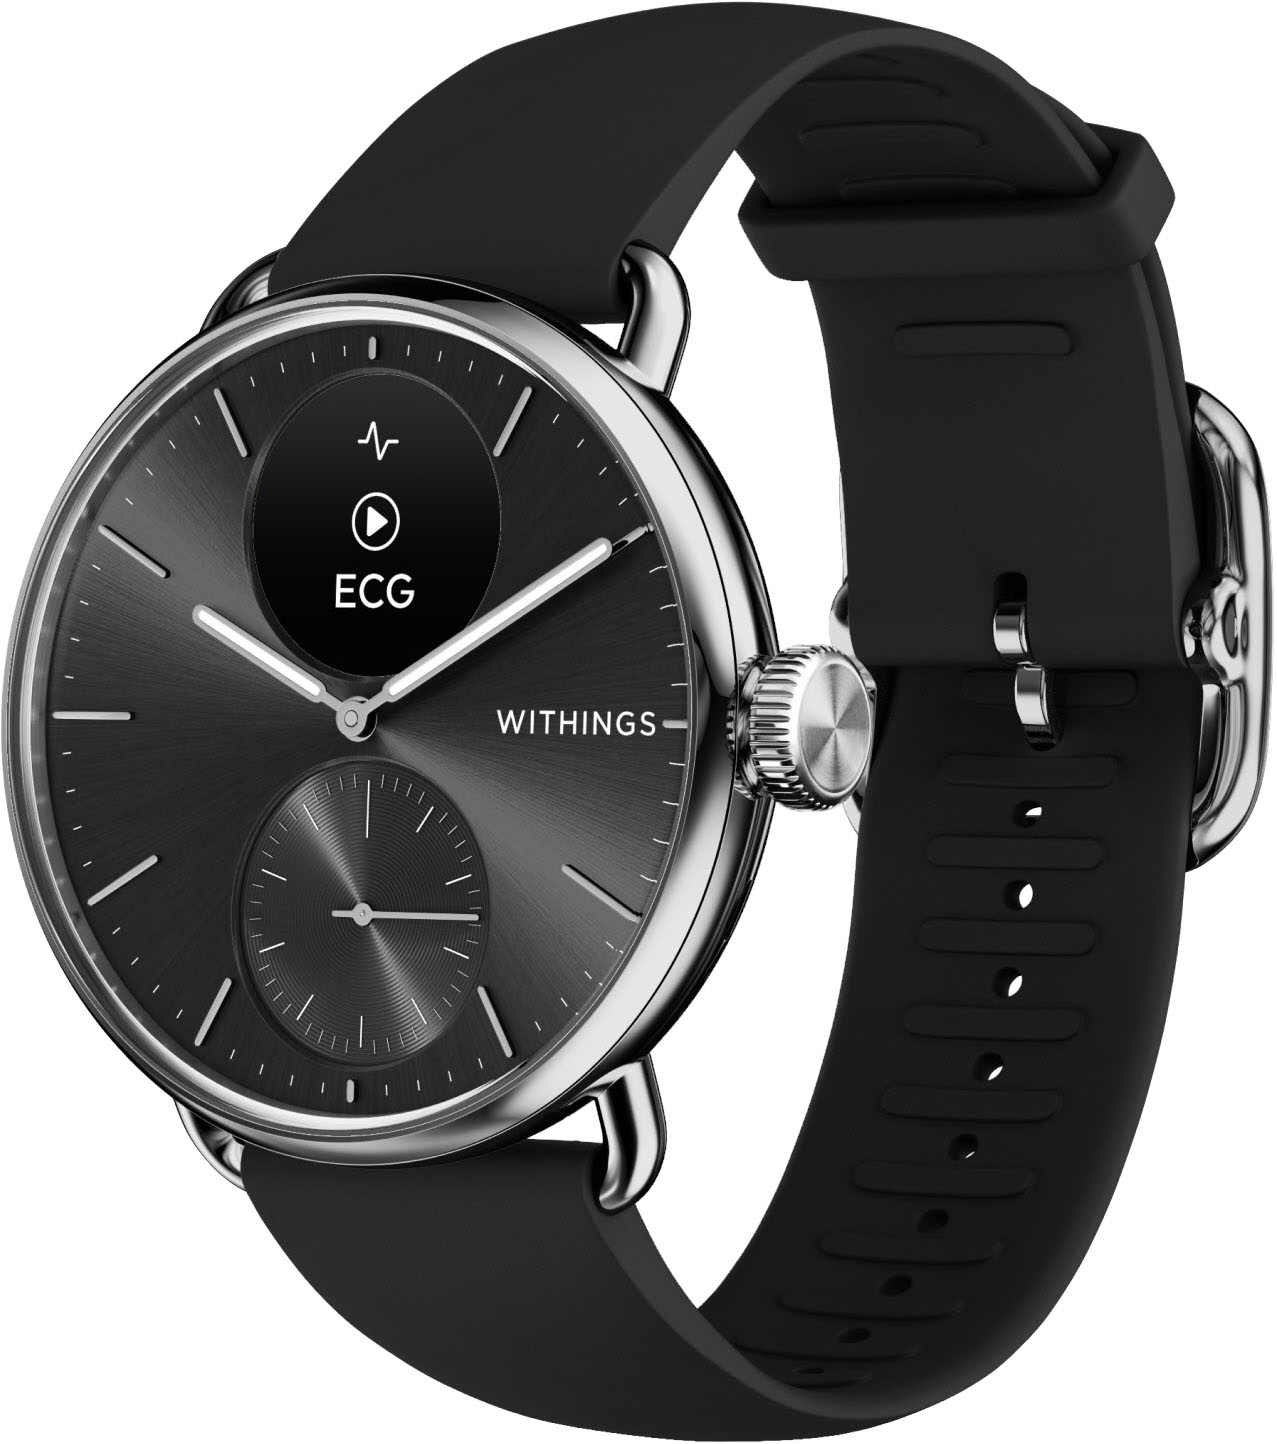 Withings ScanWatch 2 hands-on: New hybrid smartwatch comes with 24/7  temperature tracking